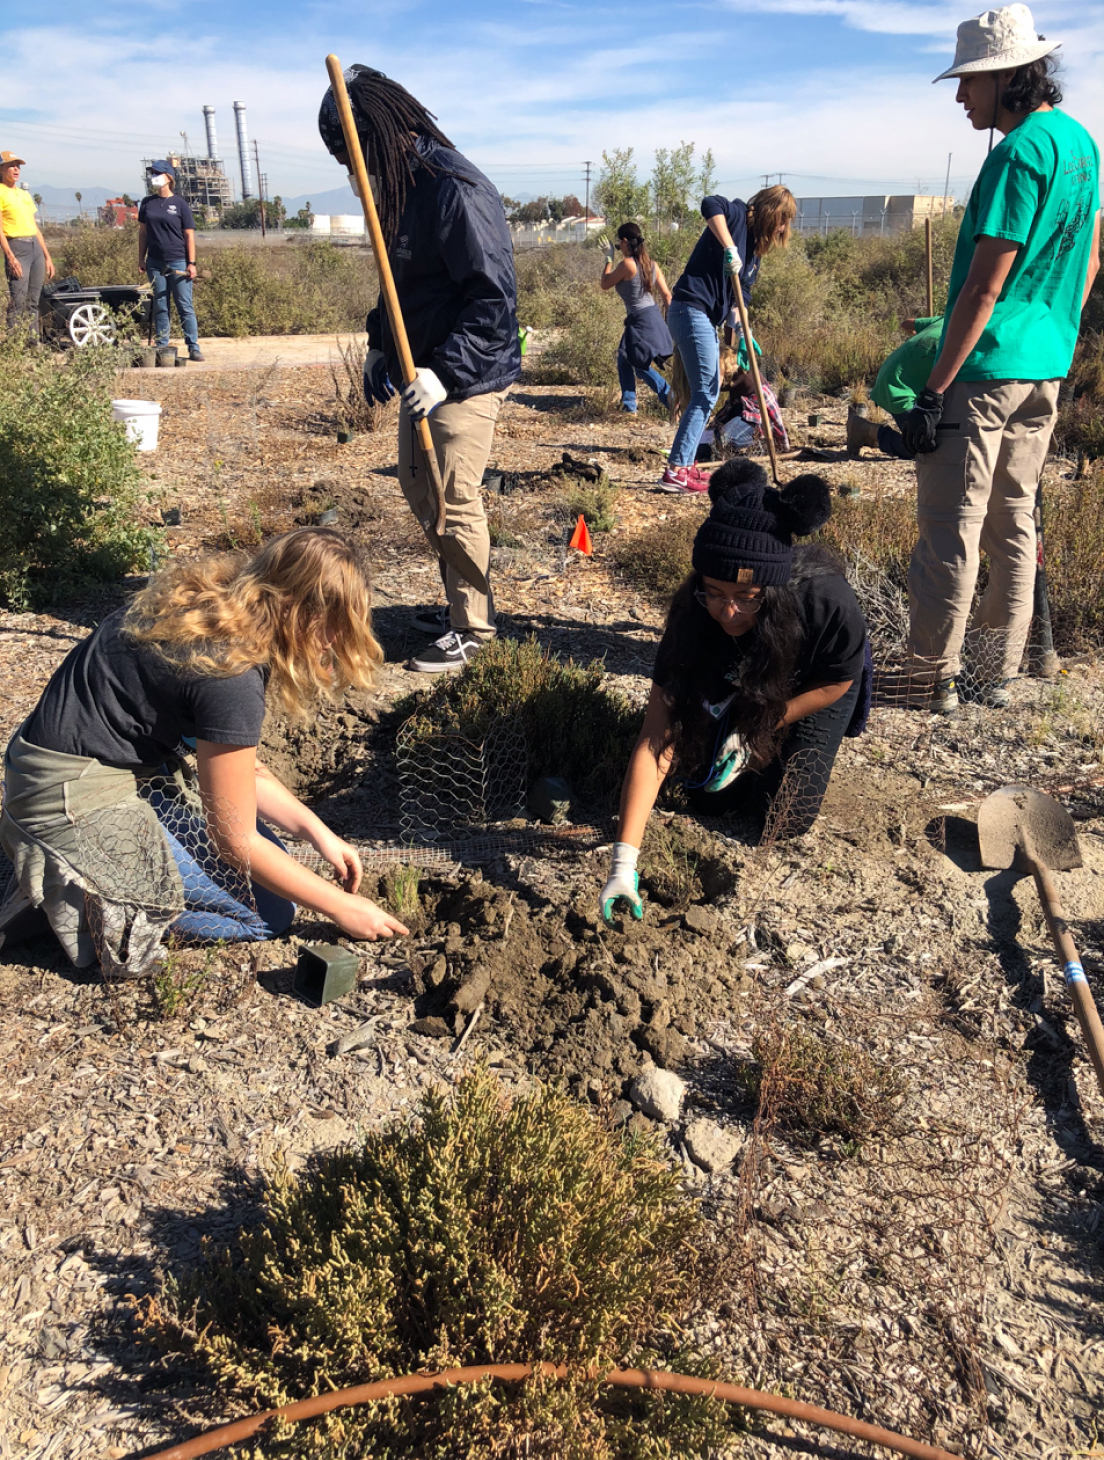 Volunteers from the Outreach program working together to restore the wetlands.